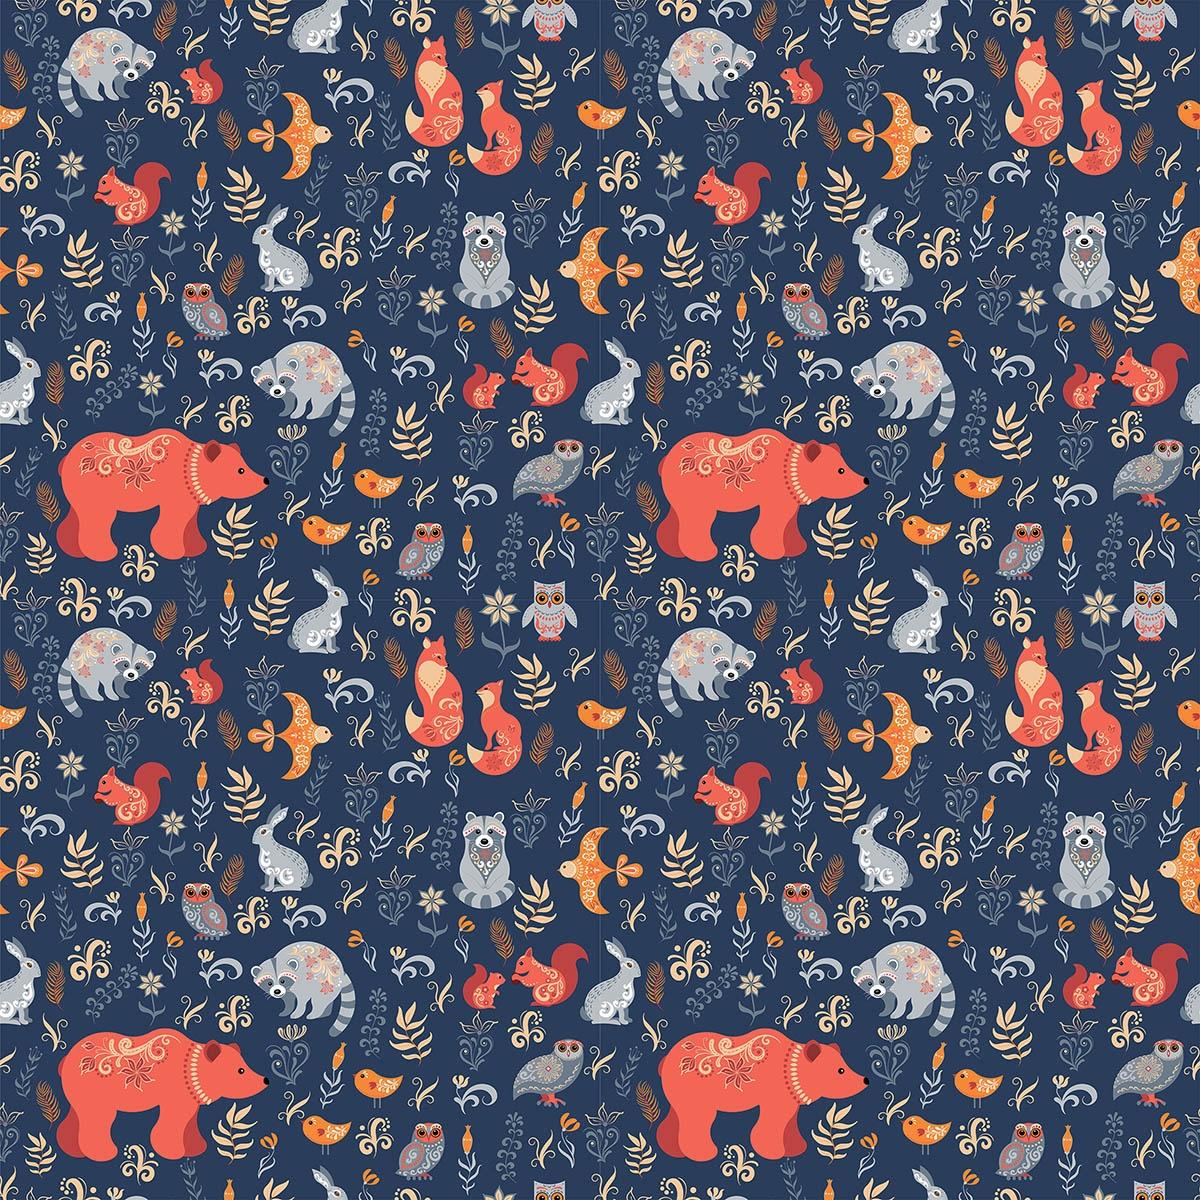 A pattern of animals and birds